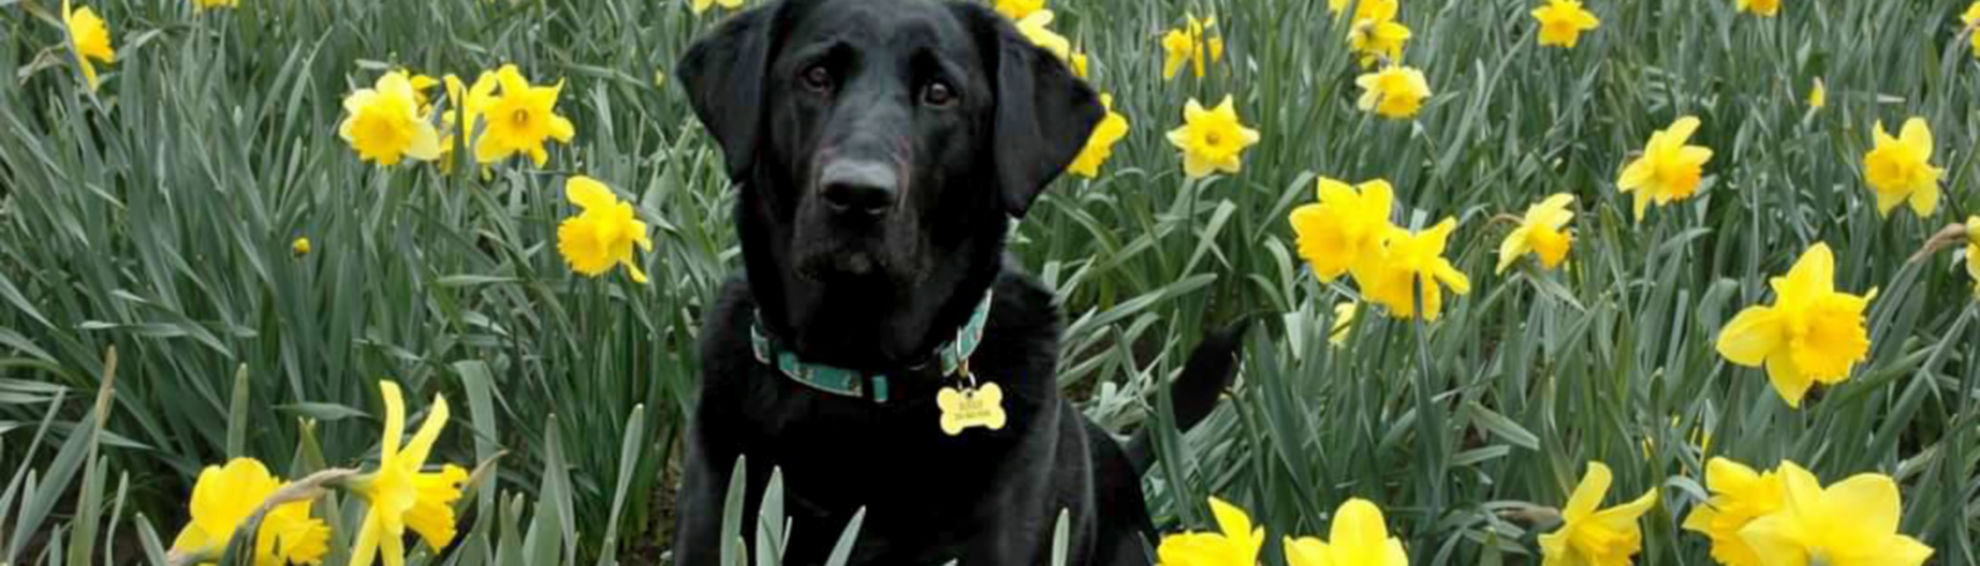 A black Labrador Retriever sitting in a field surrounded by yellow daffodils.